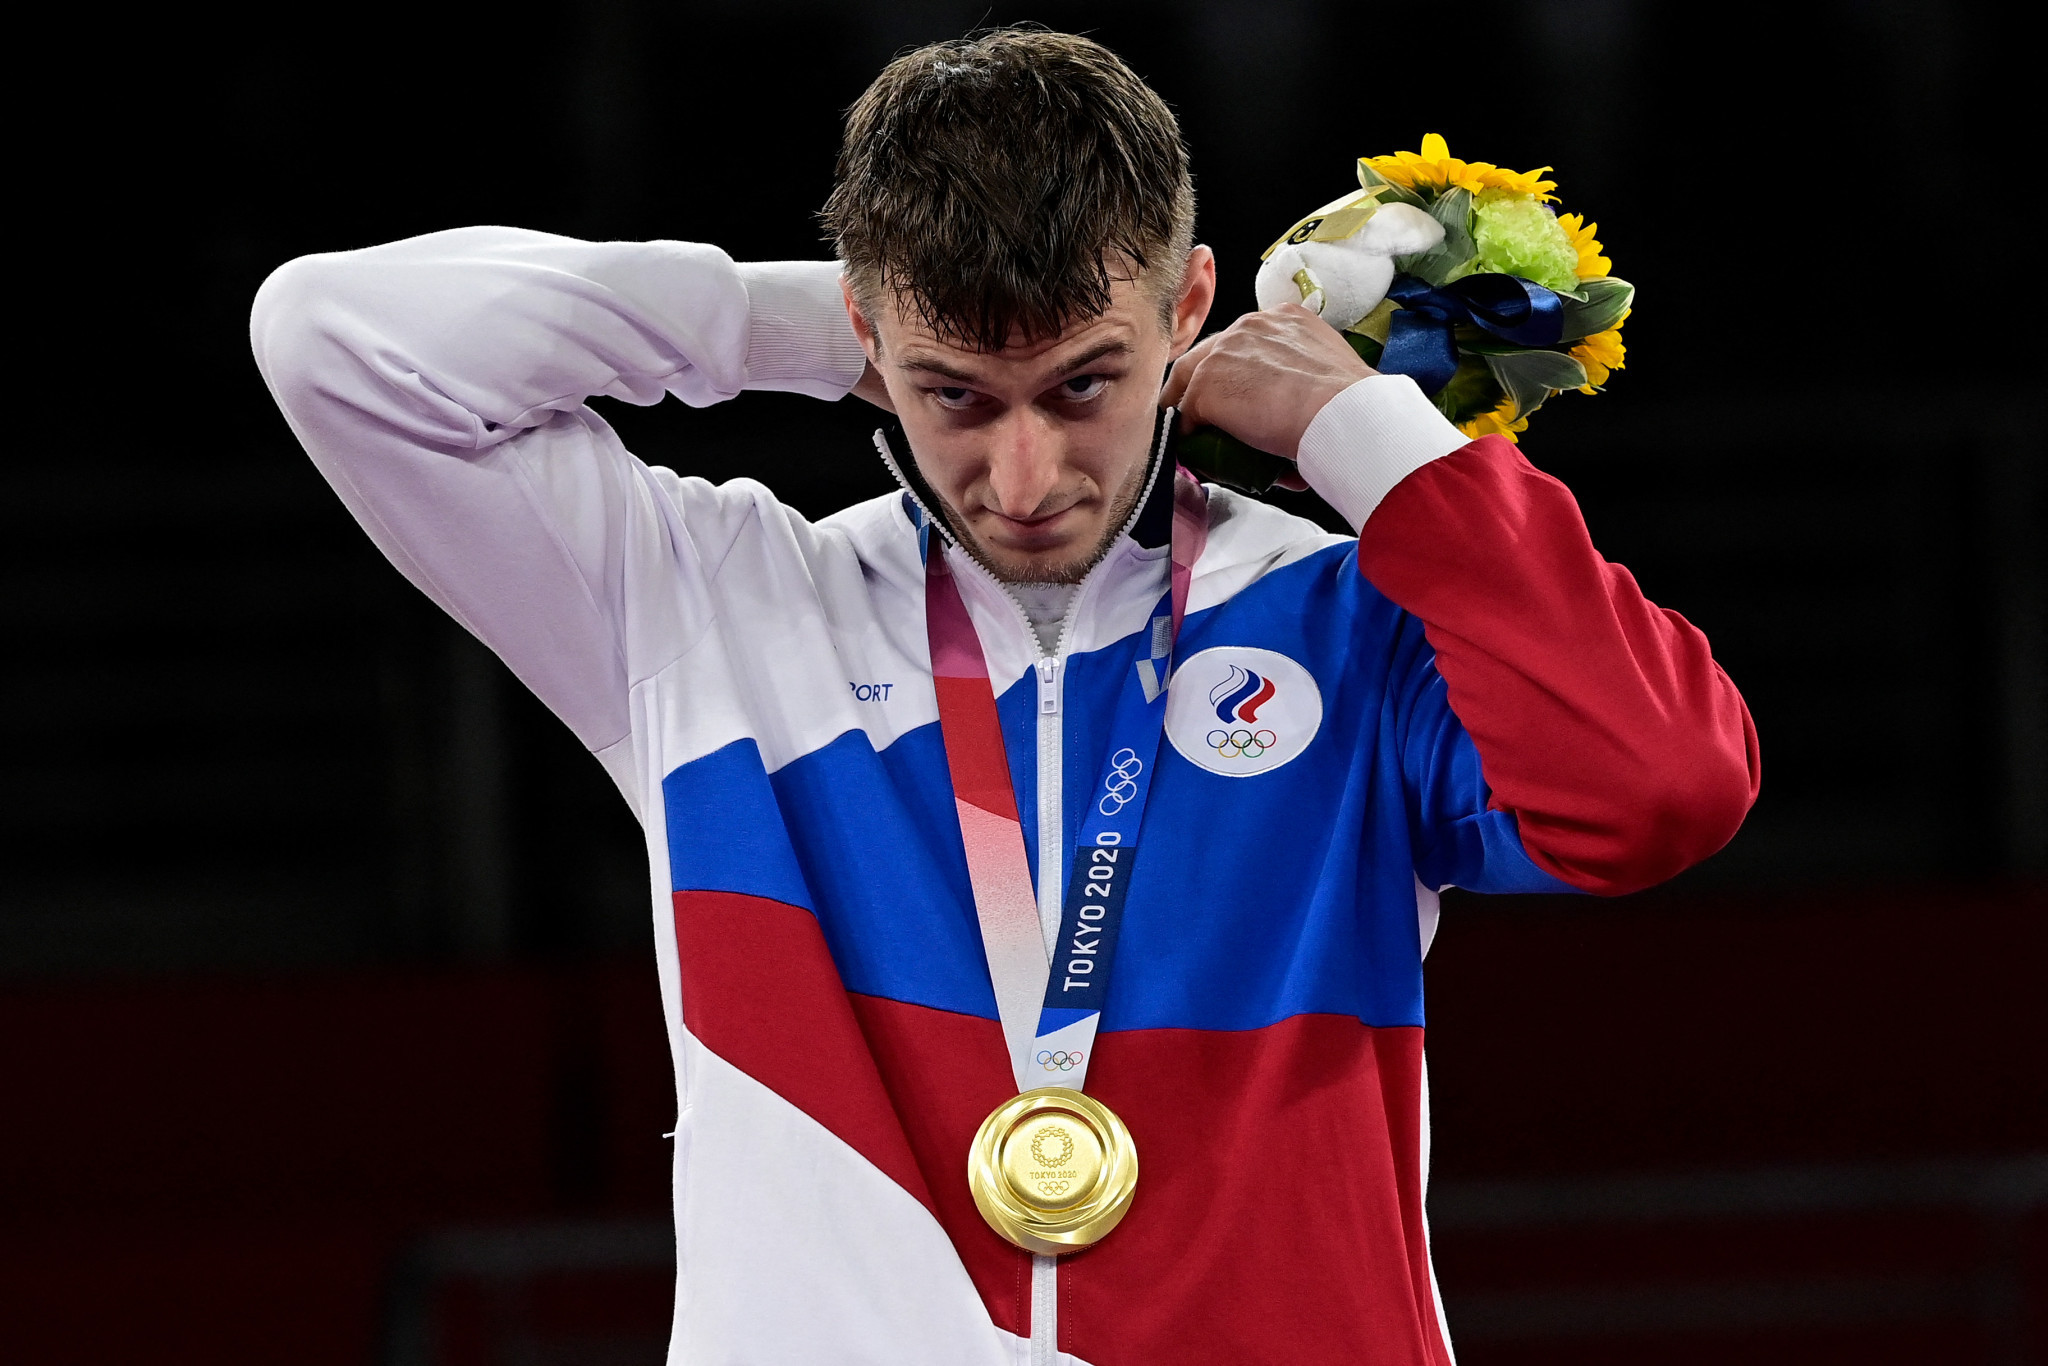 Vladislav Larin was one of two Russian Olympic taekwondo champions to be banned from competing at the World Championships ©Getty Images